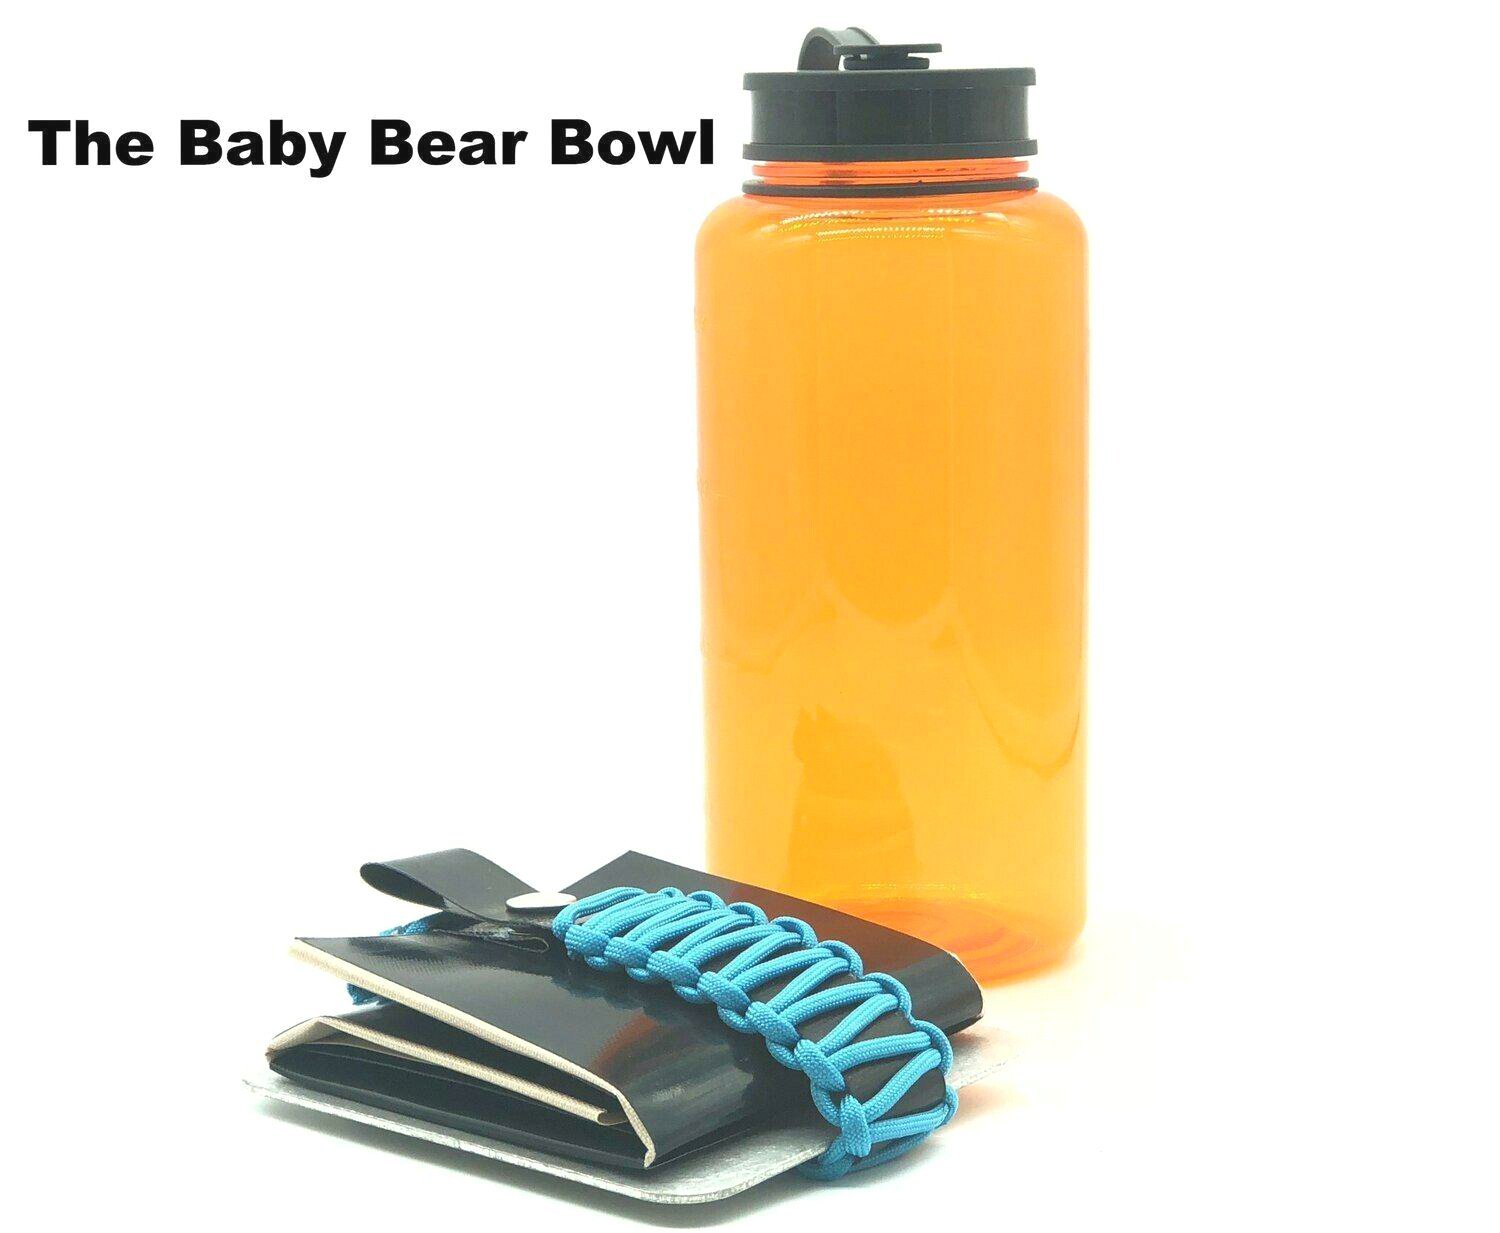 Bear Bowl Folding Cook Pot With Free Dog Tag Sized Eating Tool-Grimworkshop-bugoutbag-bushcraft-edc-gear-edctool-everydaycarry-survivalcard-survivalkit-wilderness-prepping-toolkit